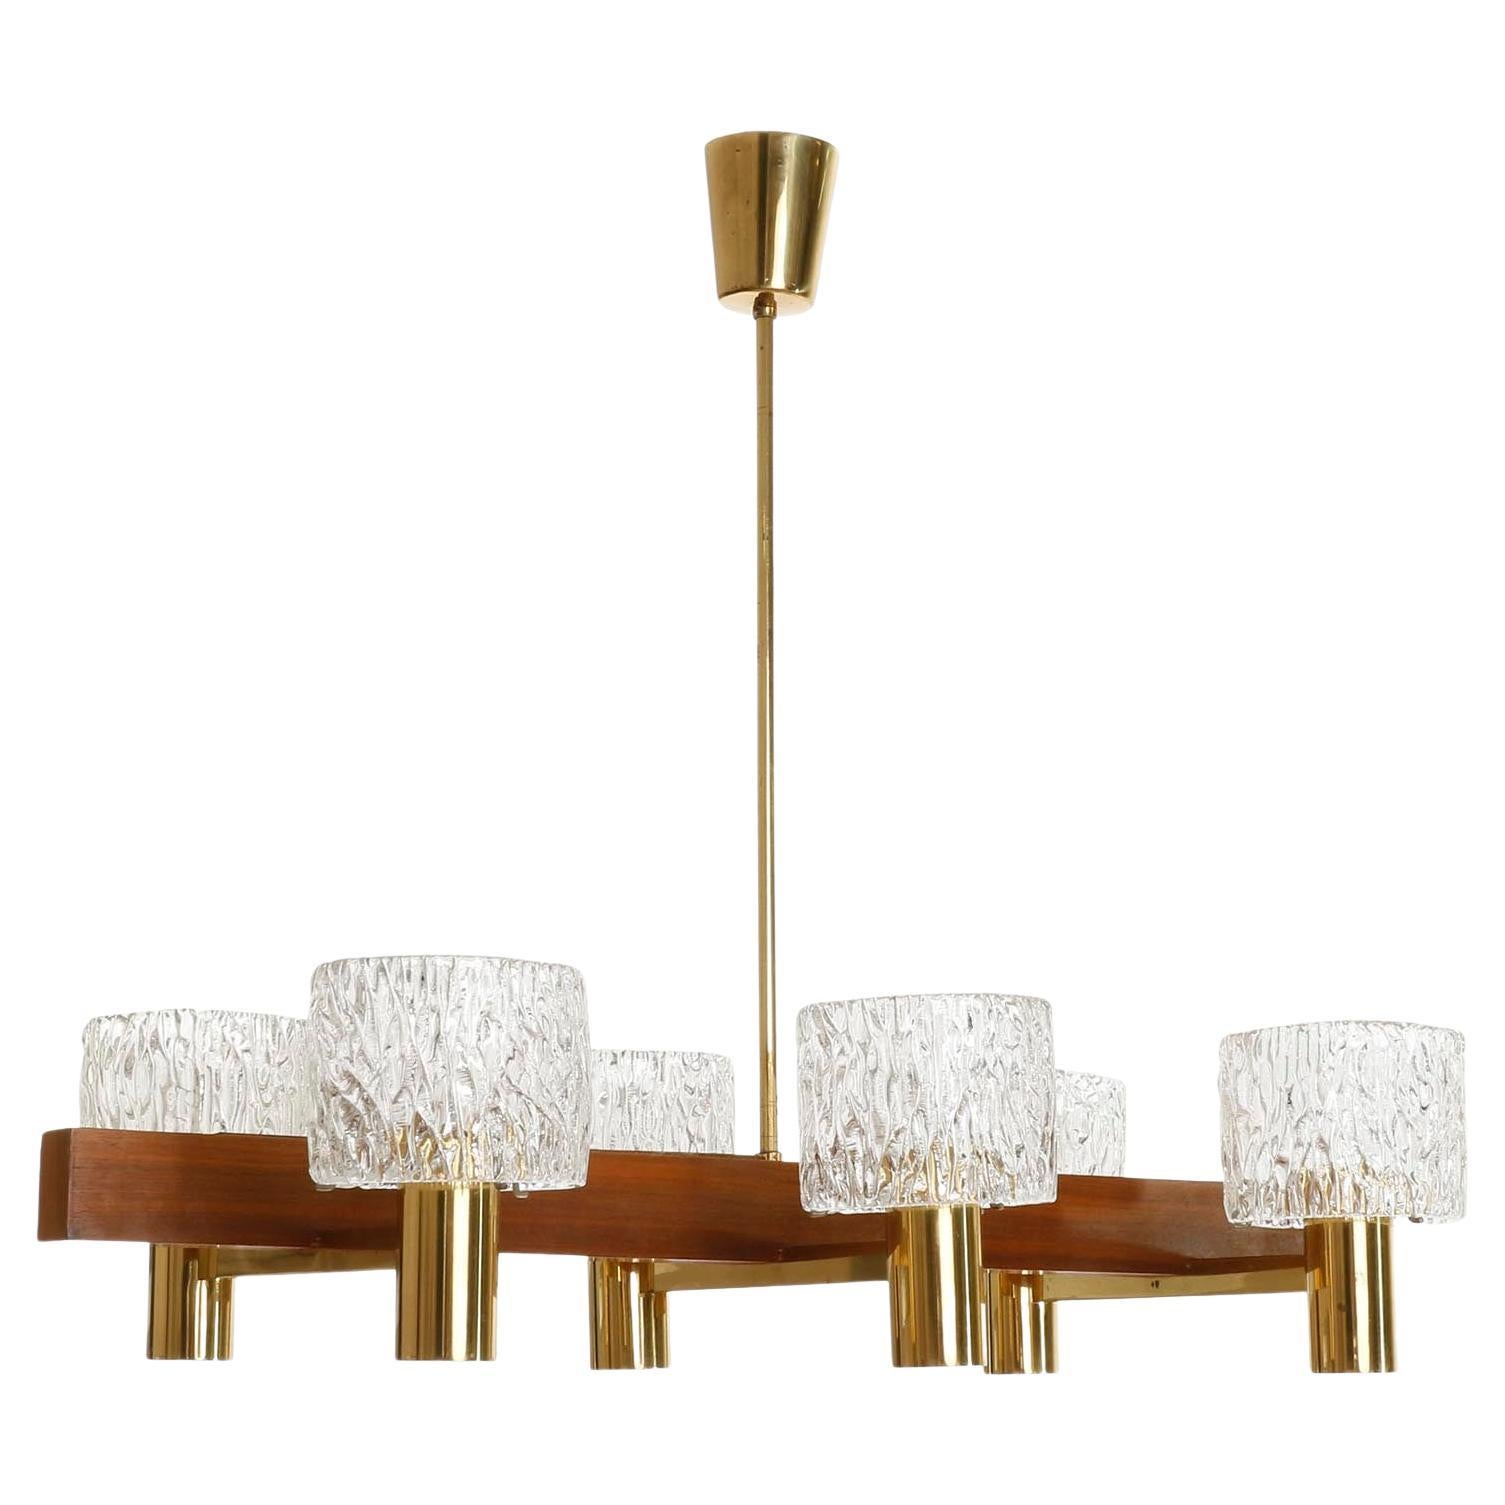 A six-arm chandelier by J.T. Kalmar, Vienna, manufacured in Mid-Century in 1950s or early 1960s. 
The fixture is made of a nice mixture of materials: textured clear glass lamp shades, brass and warm walnut wood.
The length of the rod can be altered